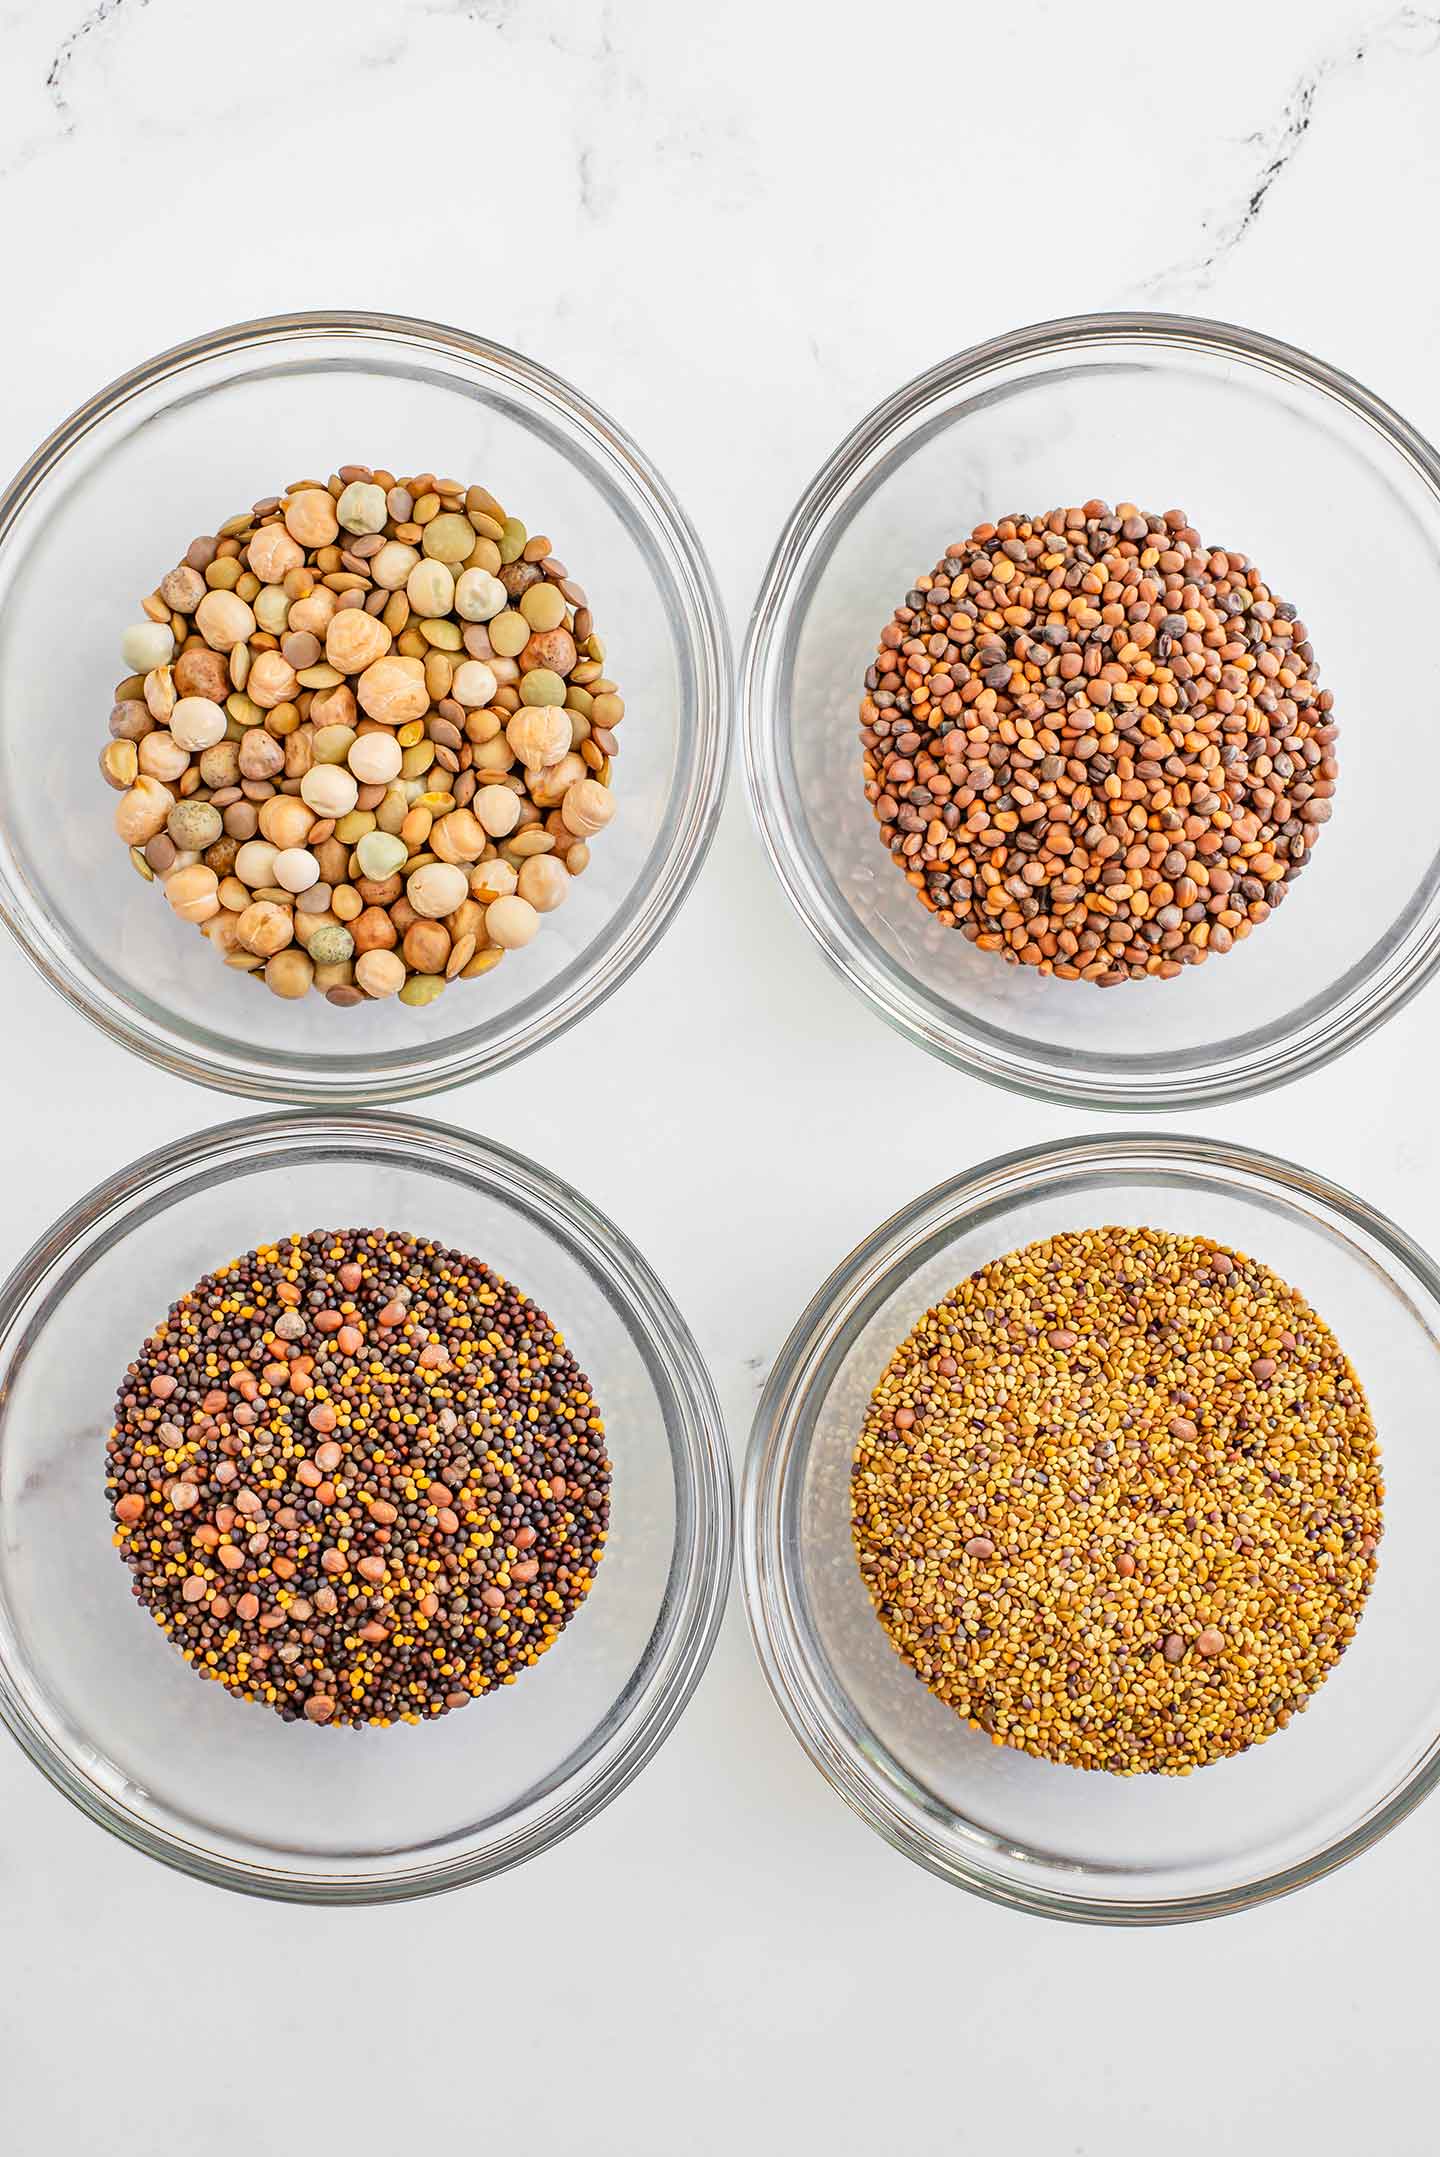 Top down view of four small glass bowls with different varieties of seeds for growing sprouts at home.